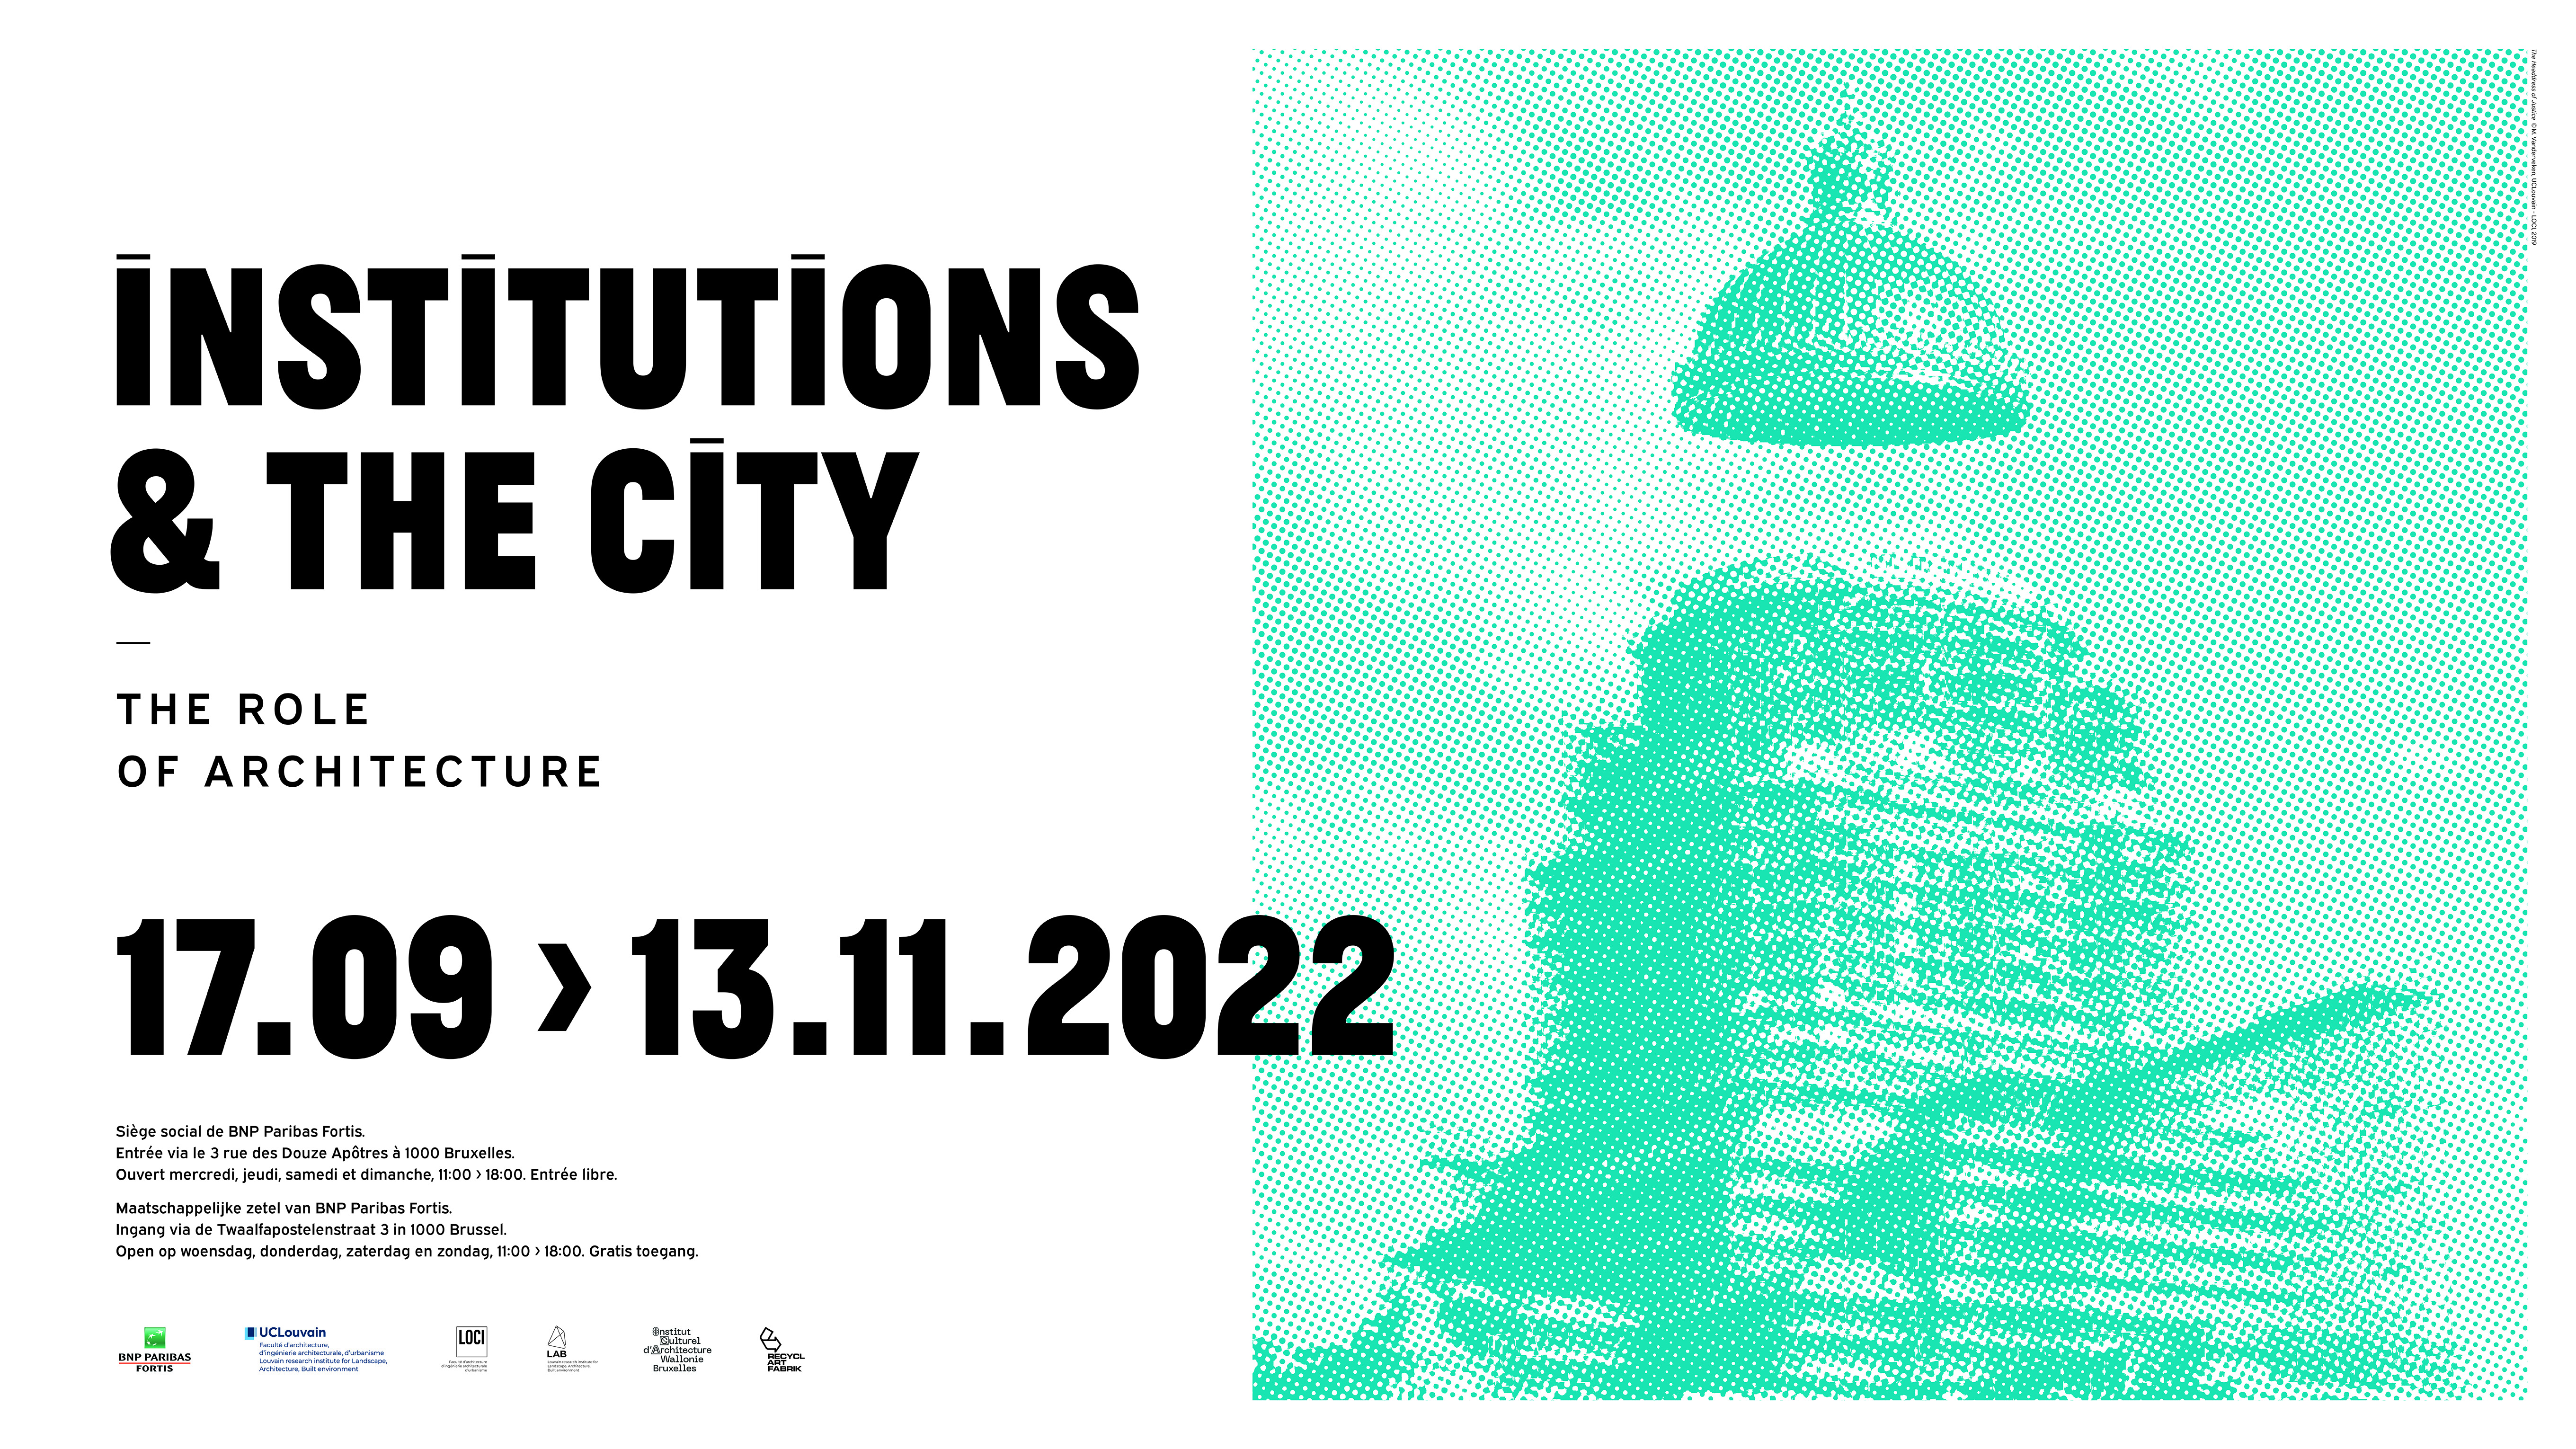 Exhibition Institutions & the City